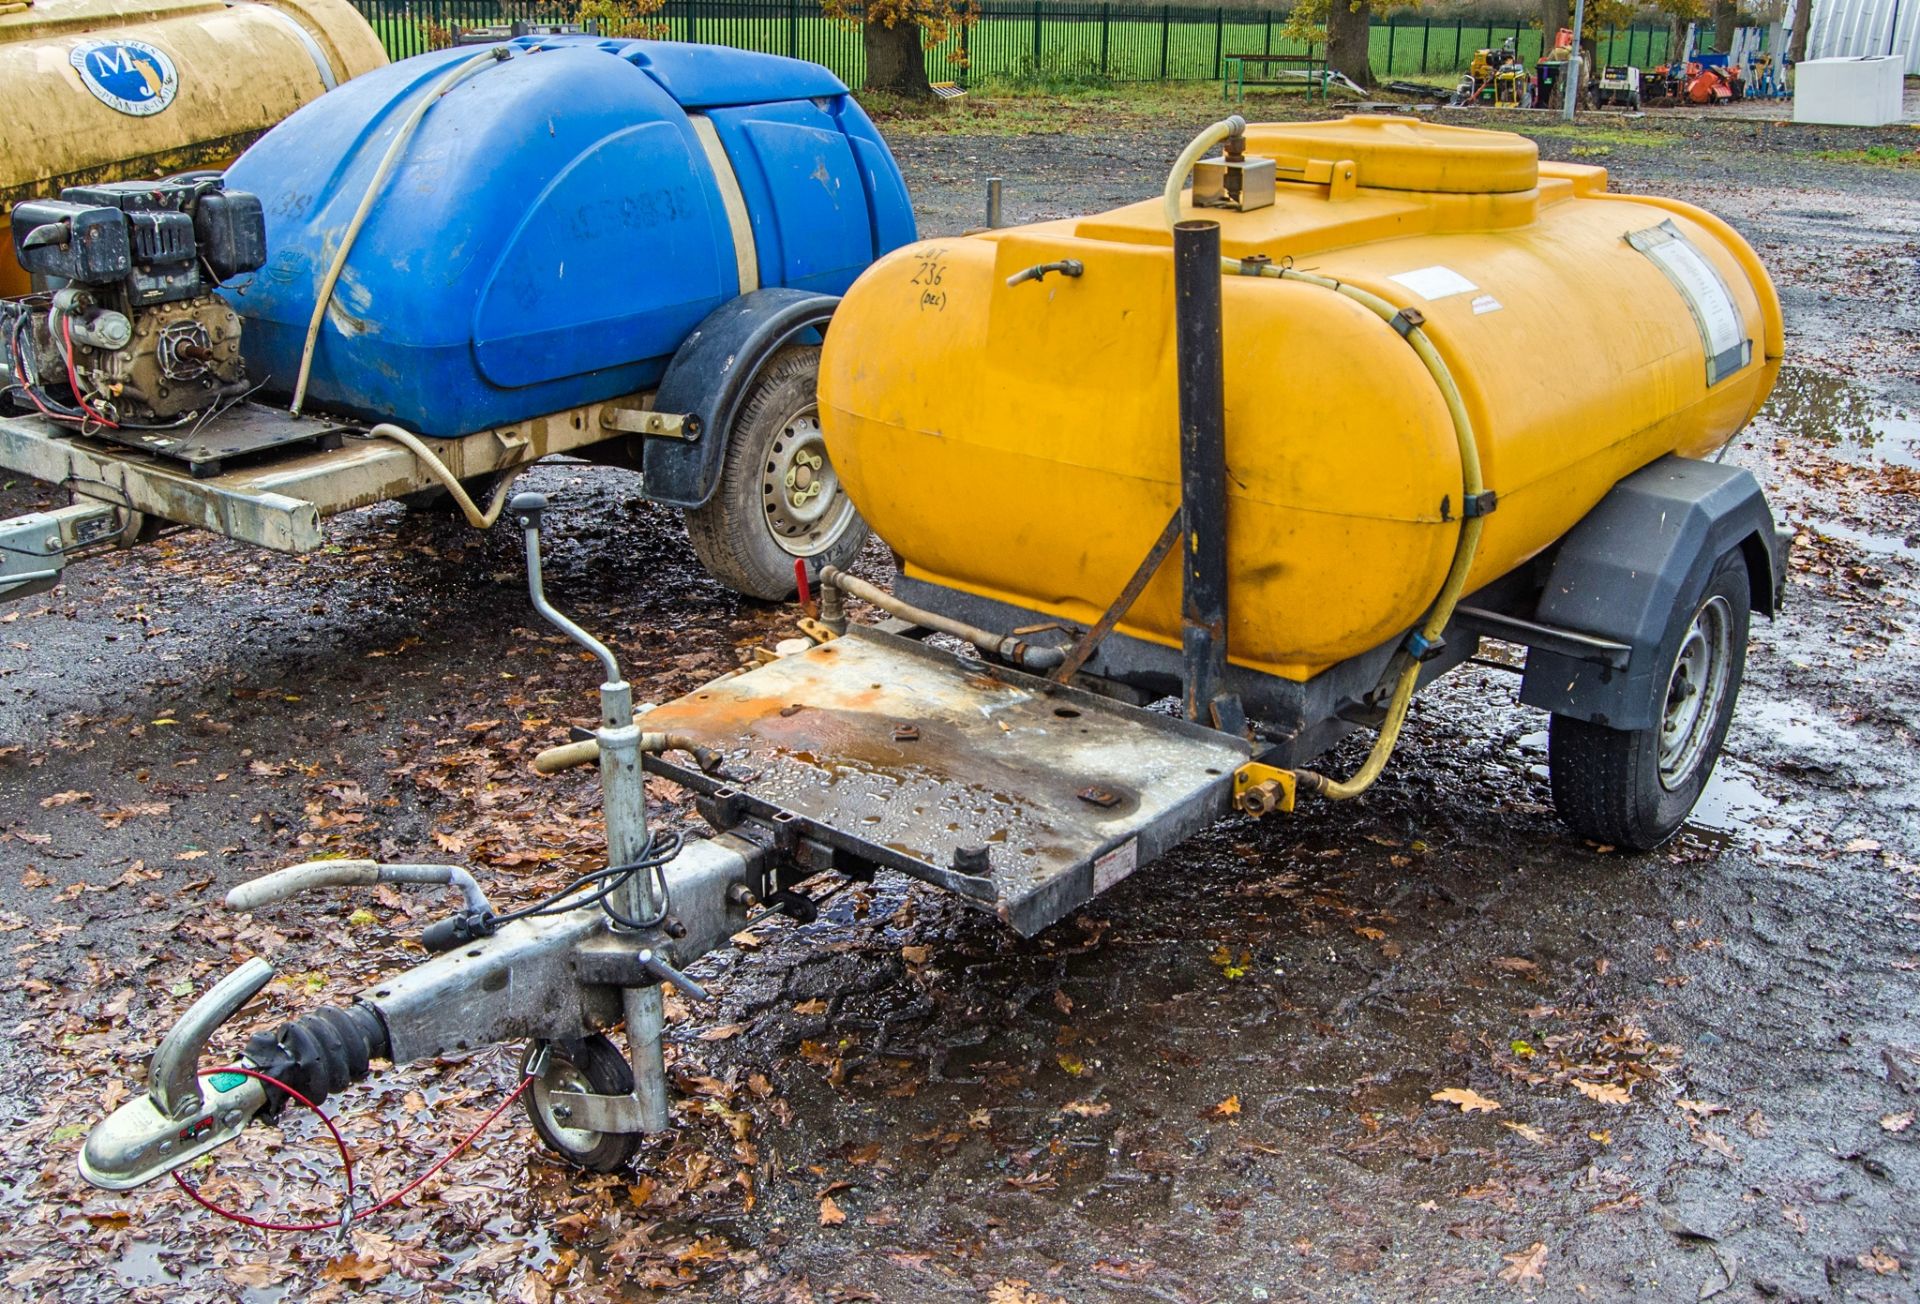 Jet Chem 1125 litre fast tow water bowser